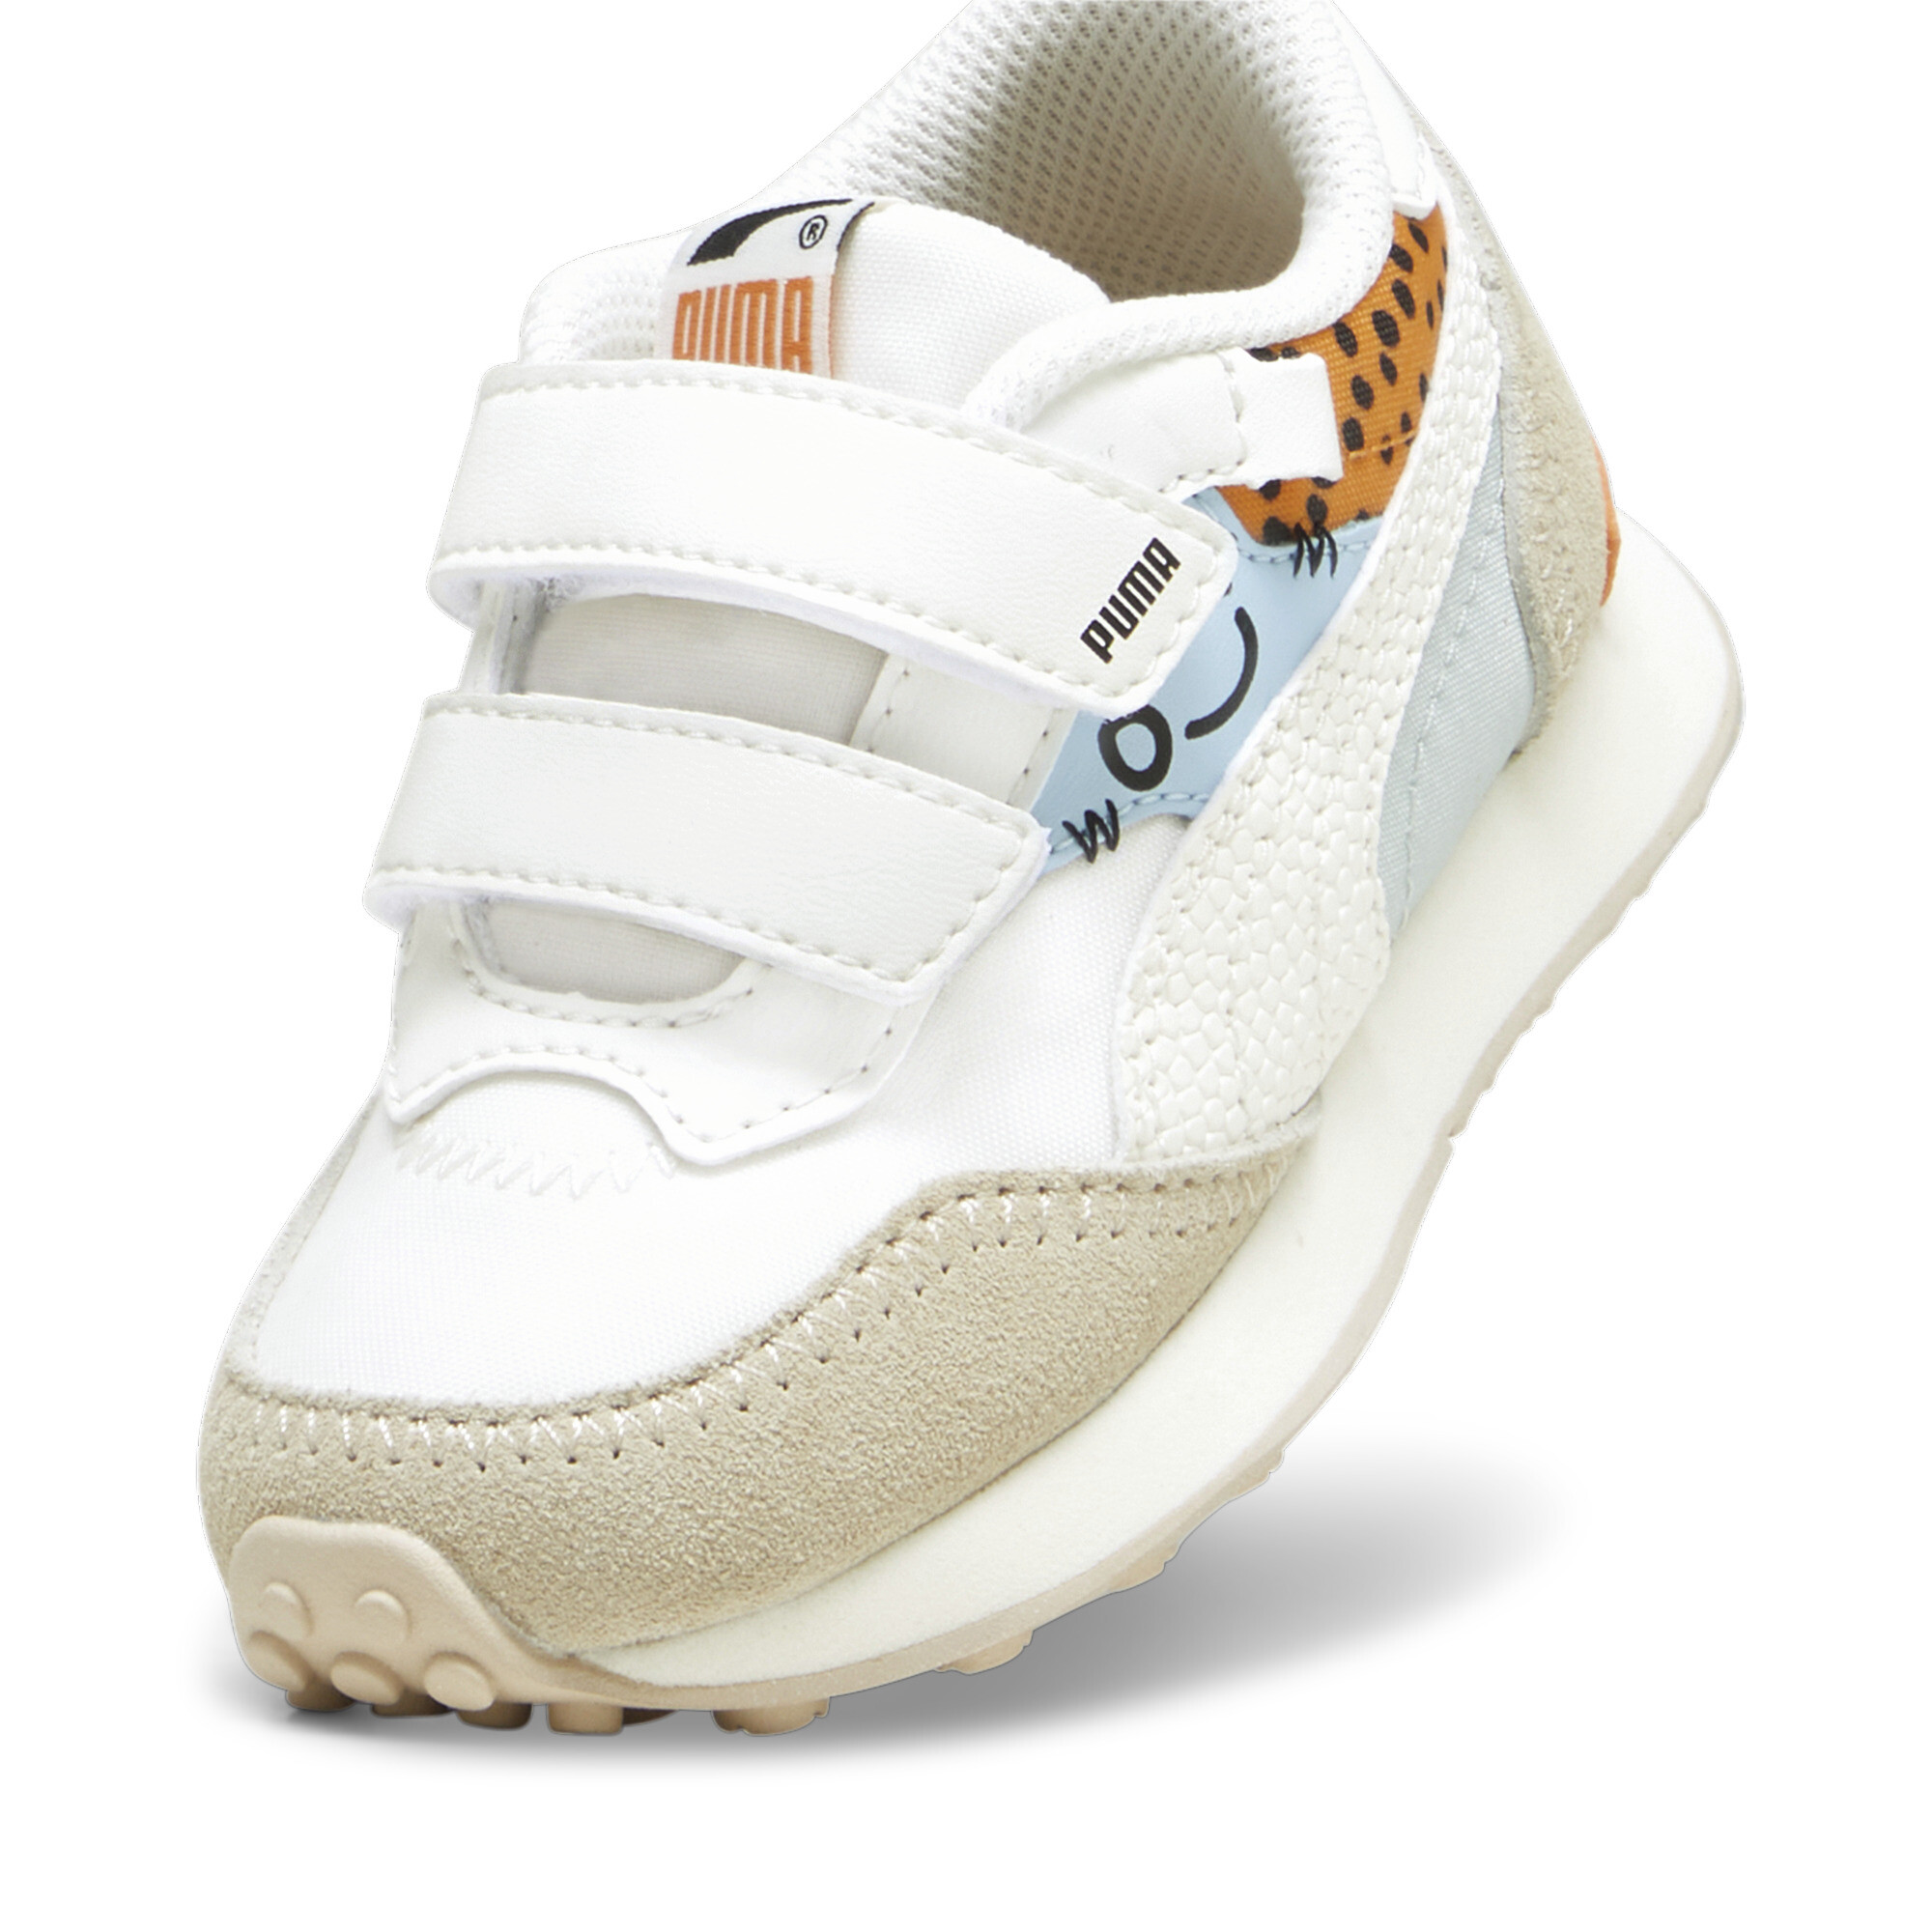 Kids' PUMA Rider FV Mix Match Toddlers' Sneakers In 20 - White, Size EU 19